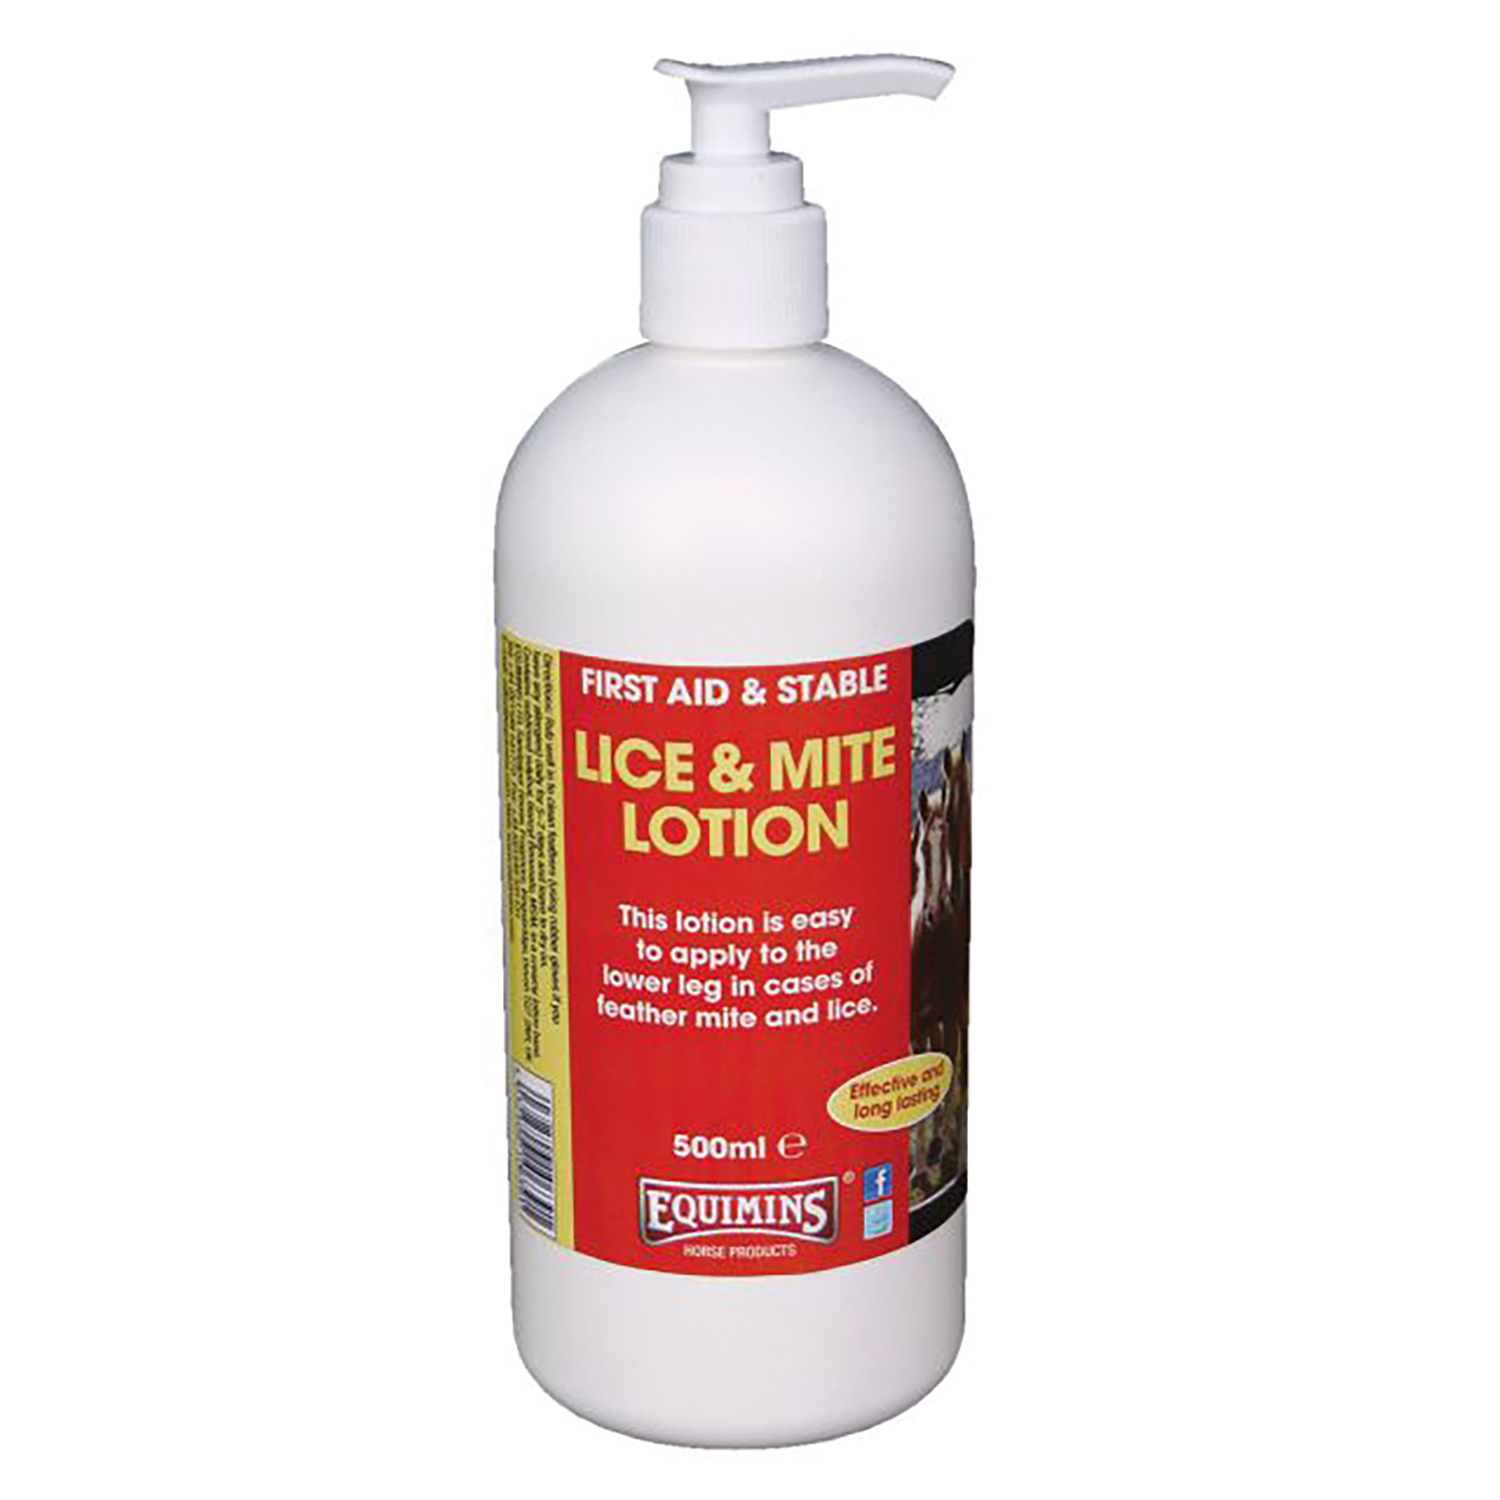 EQUIMINS LICE & MITE LOTION 500 ML 500 ML